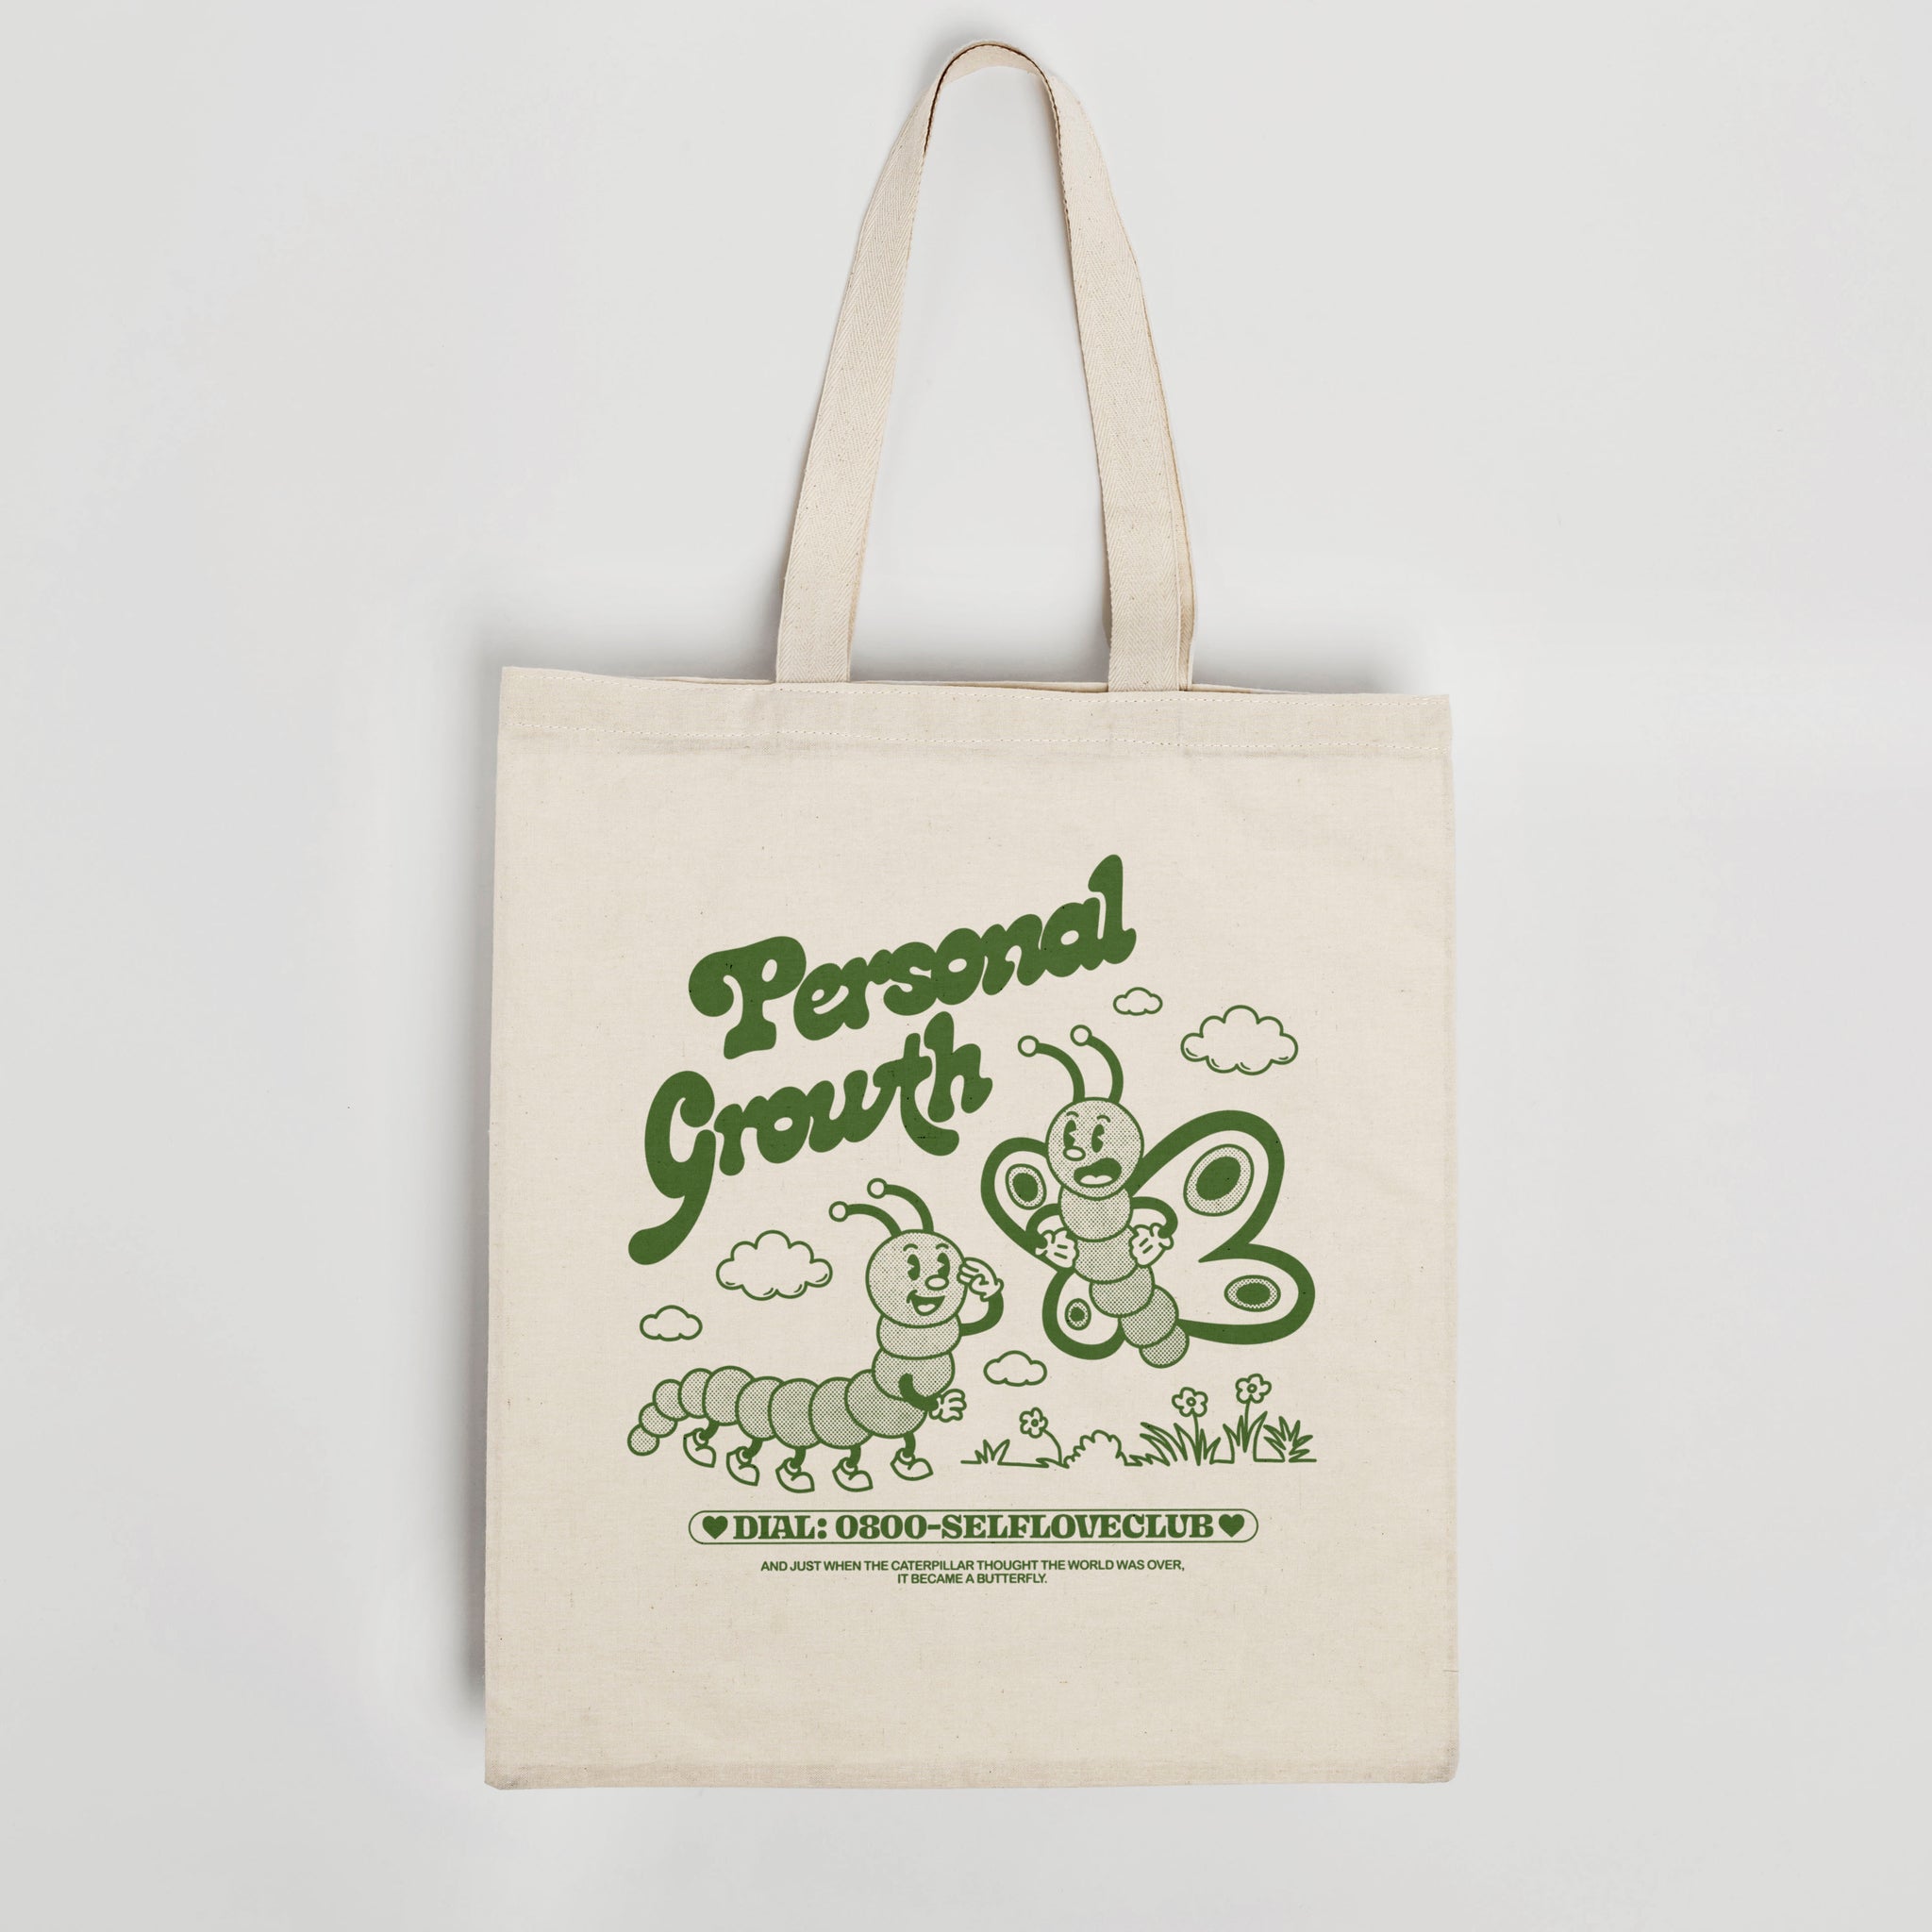 'Personal Growth' organic cotton canvas tote bag